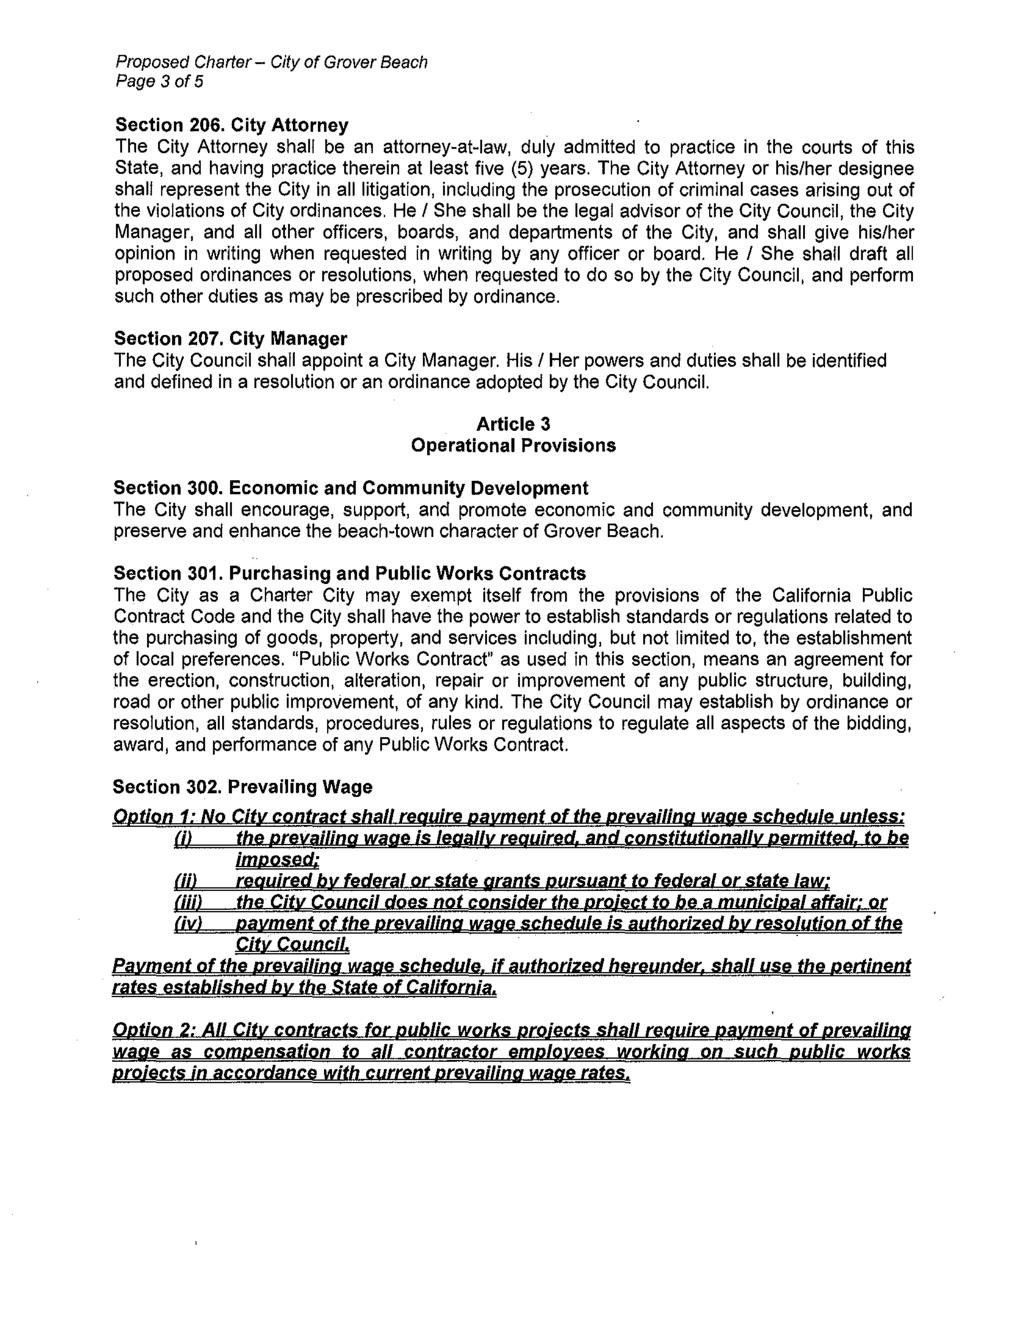 Proposed Charter - City of Grover Beach Page 3 of 5 Section 206.